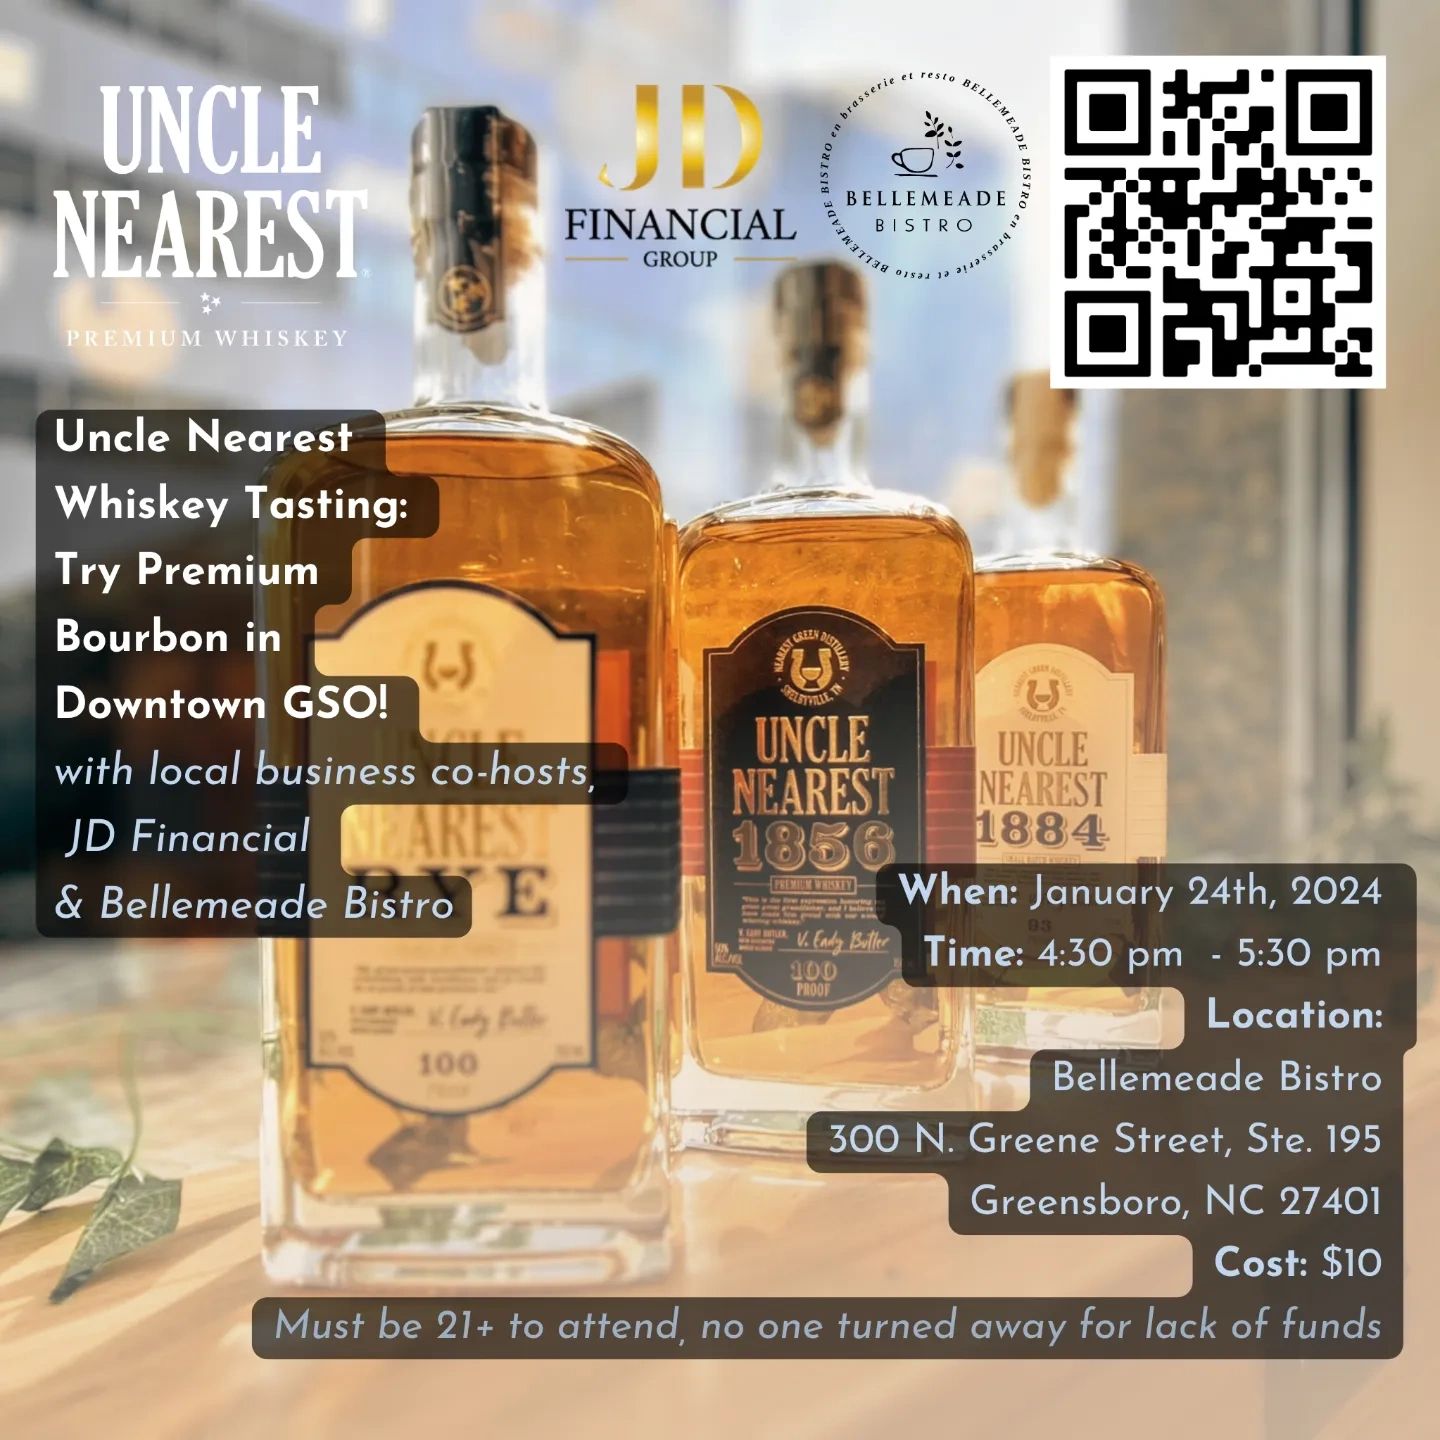 Uncle Nearest Whiskey Tasting:
Try premium bourbon in downtown GSO with local hosts JD Financial and